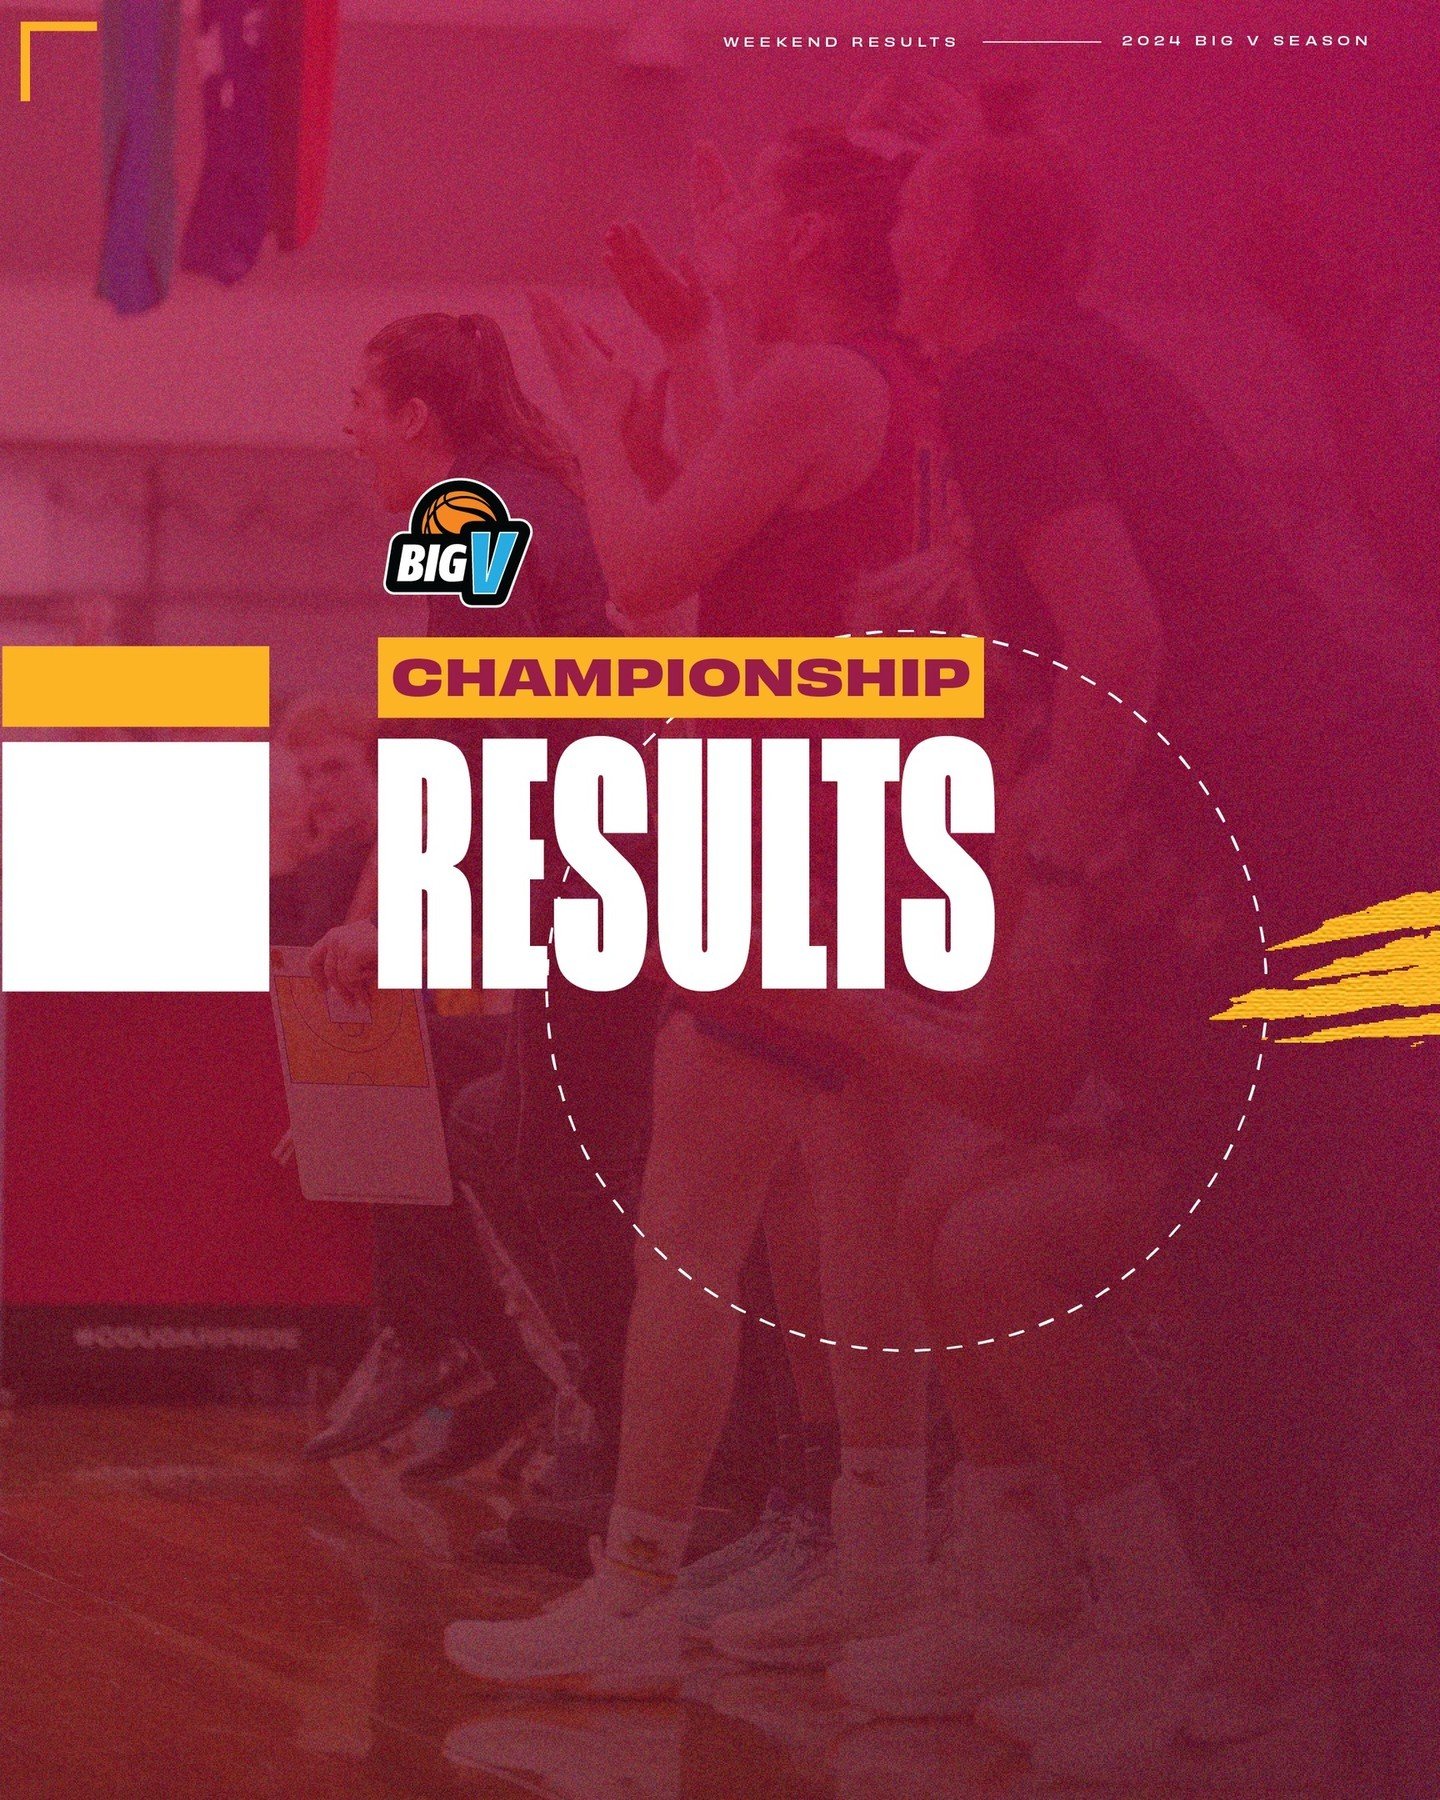 Big V Championship Results 📣⁠
⁠
Both our Championship teams went 1-1 this weekend, defending the Den against Pakenham and Shepparton, but dropping their games the next day against a tough Wyndham outfit.⁠
⁠
@bigv_ball⁠
⁠
#CougarPride⁠
#MakeThemPrey